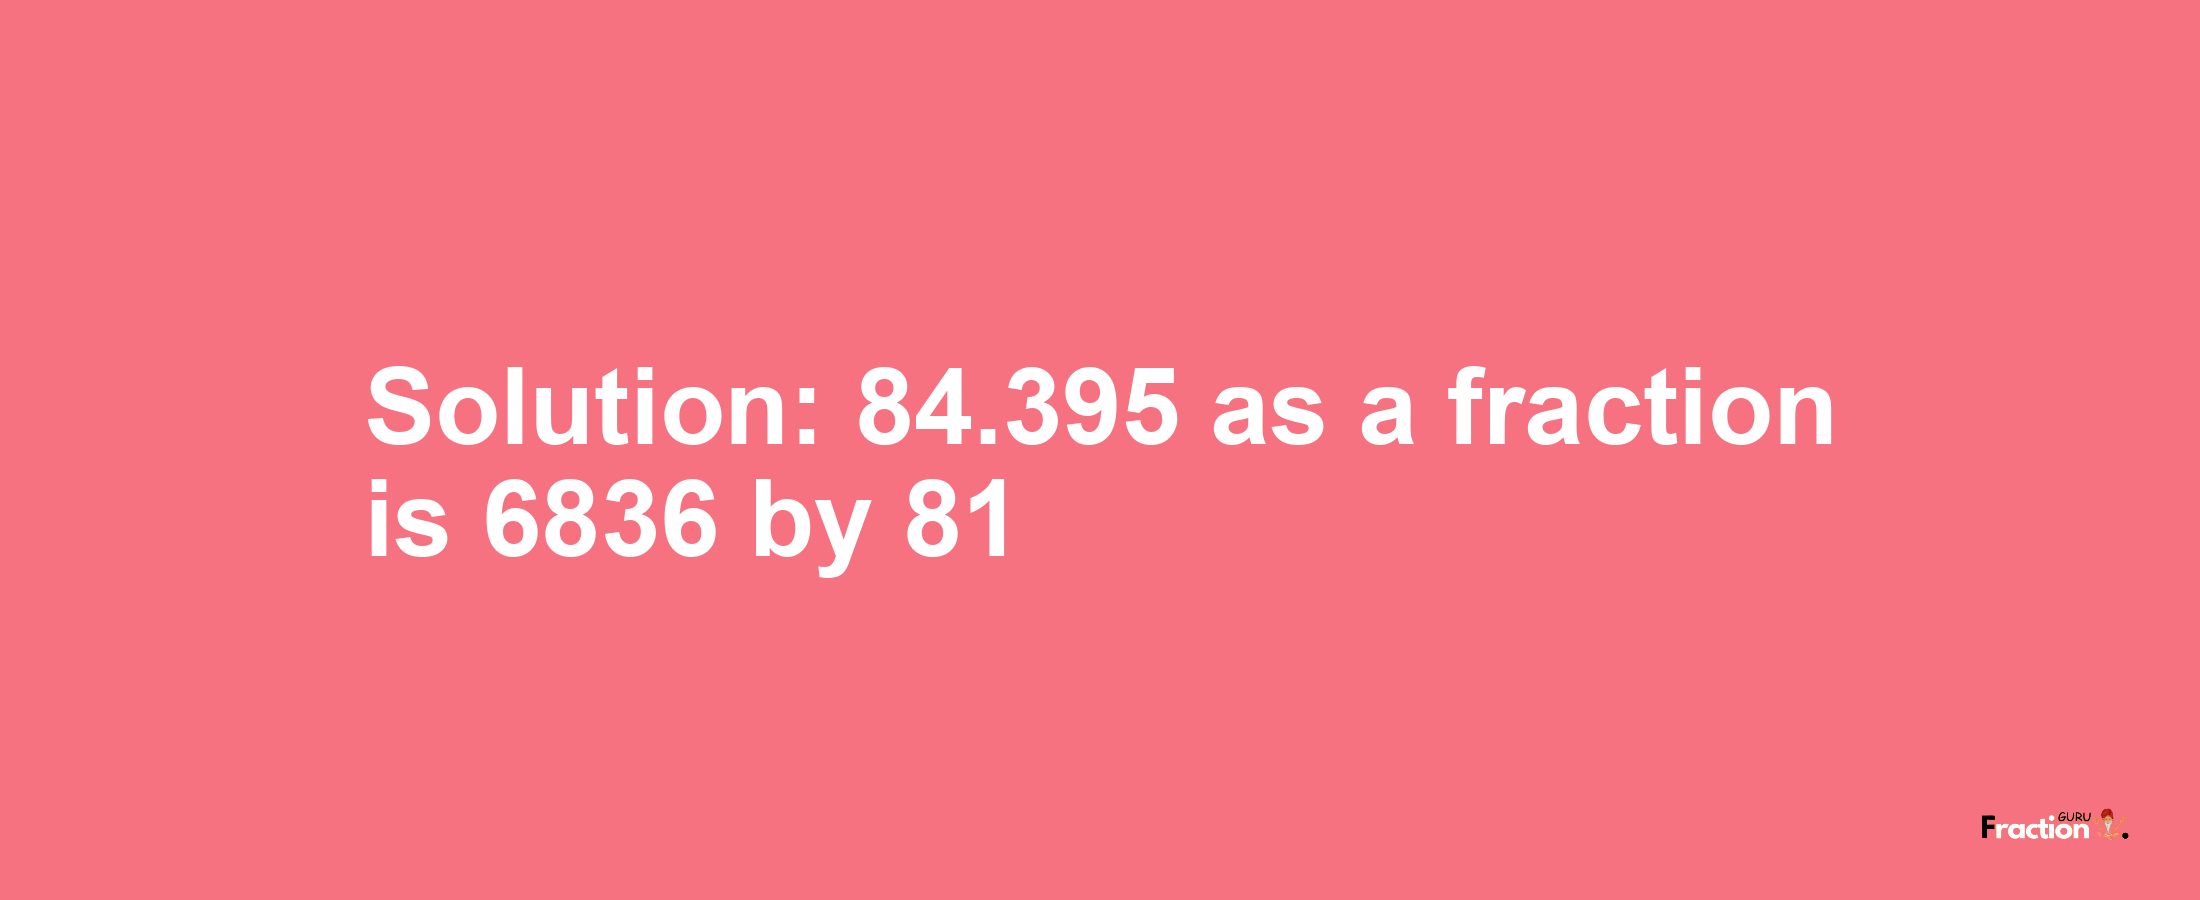 Solution:84.395 as a fraction is 6836/81